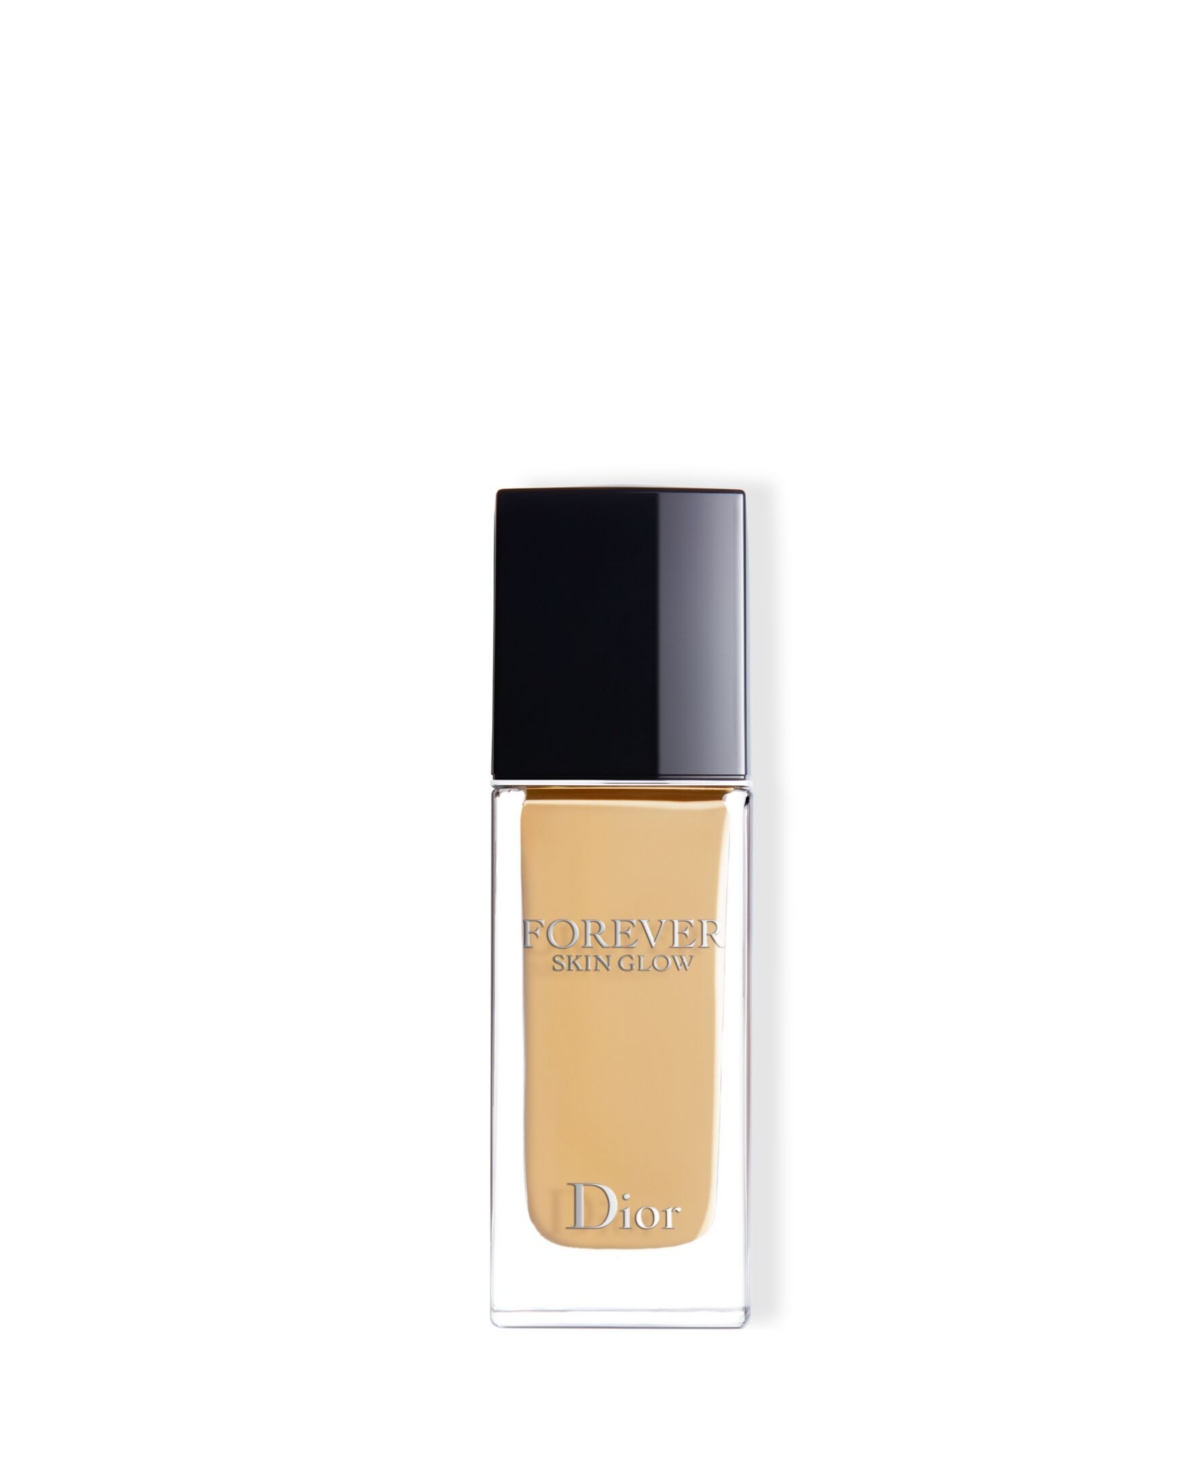 Dior Forever Skin Glow Hydrating Foundation Spf 15 In Warm Olive (light Skin With Warm Olive U